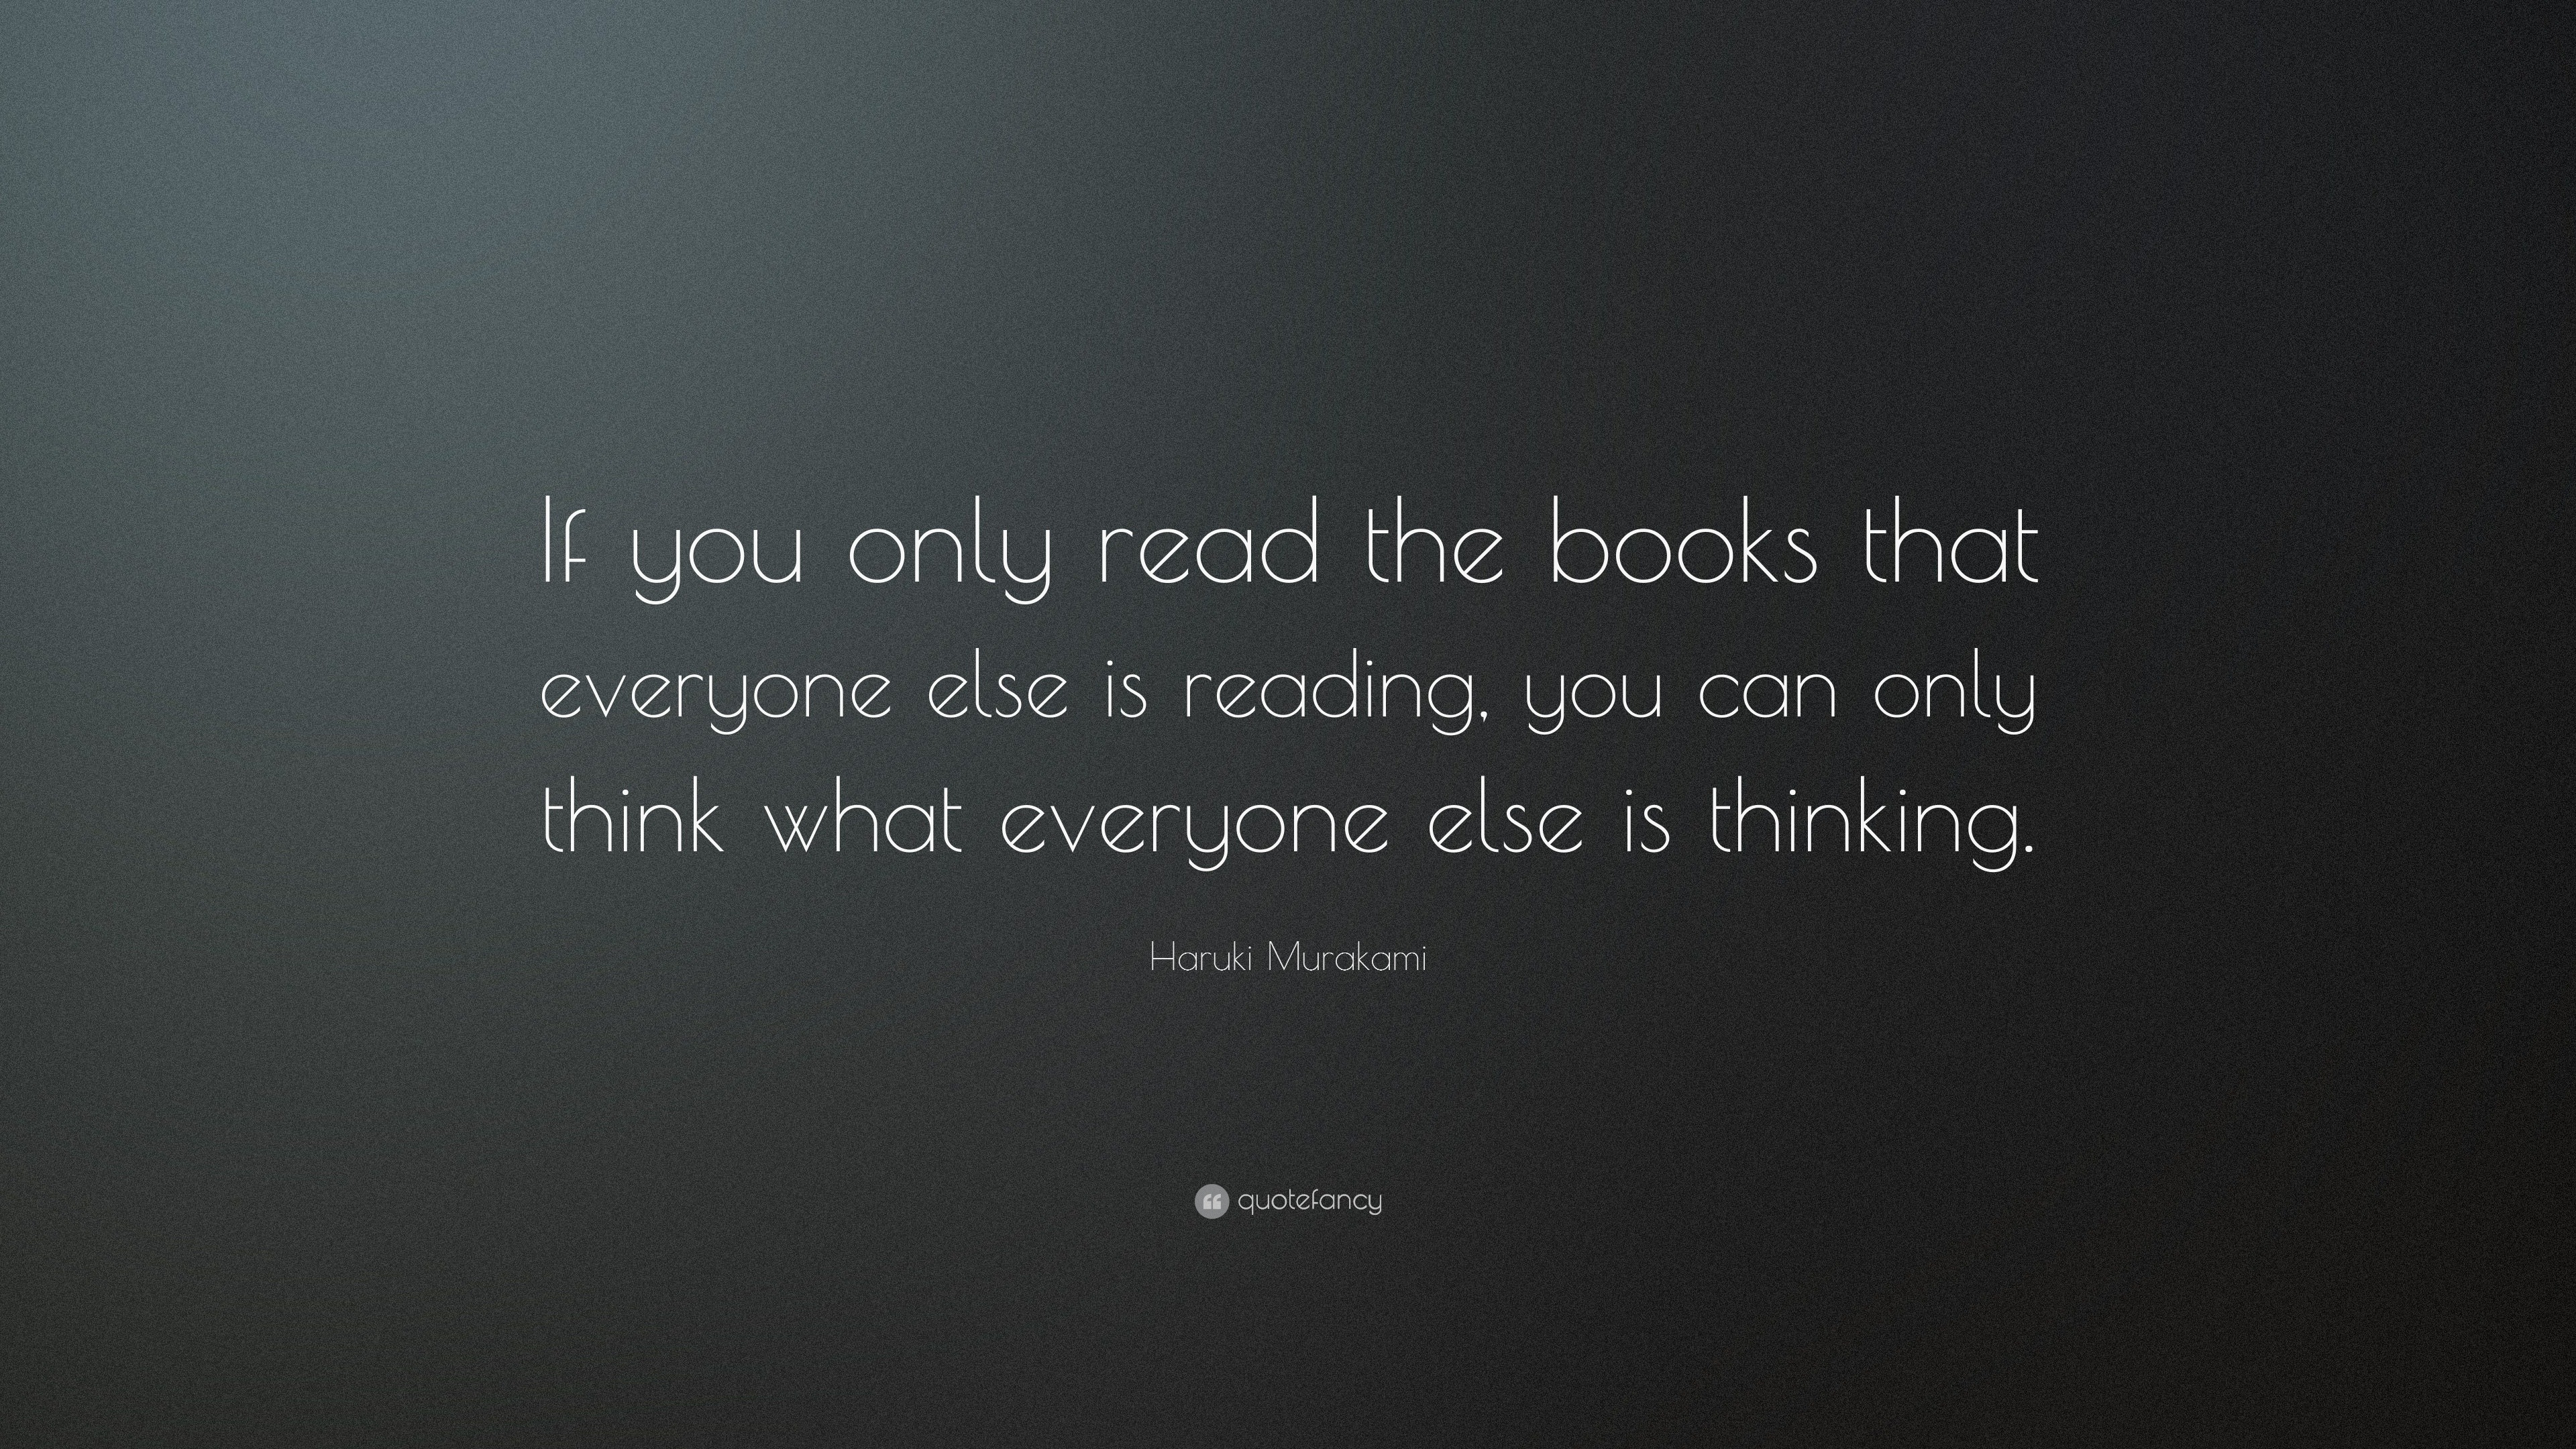 Haruki Murakami Quote “if You Only Read The Books That Everyone Else Is Reading You Can Only